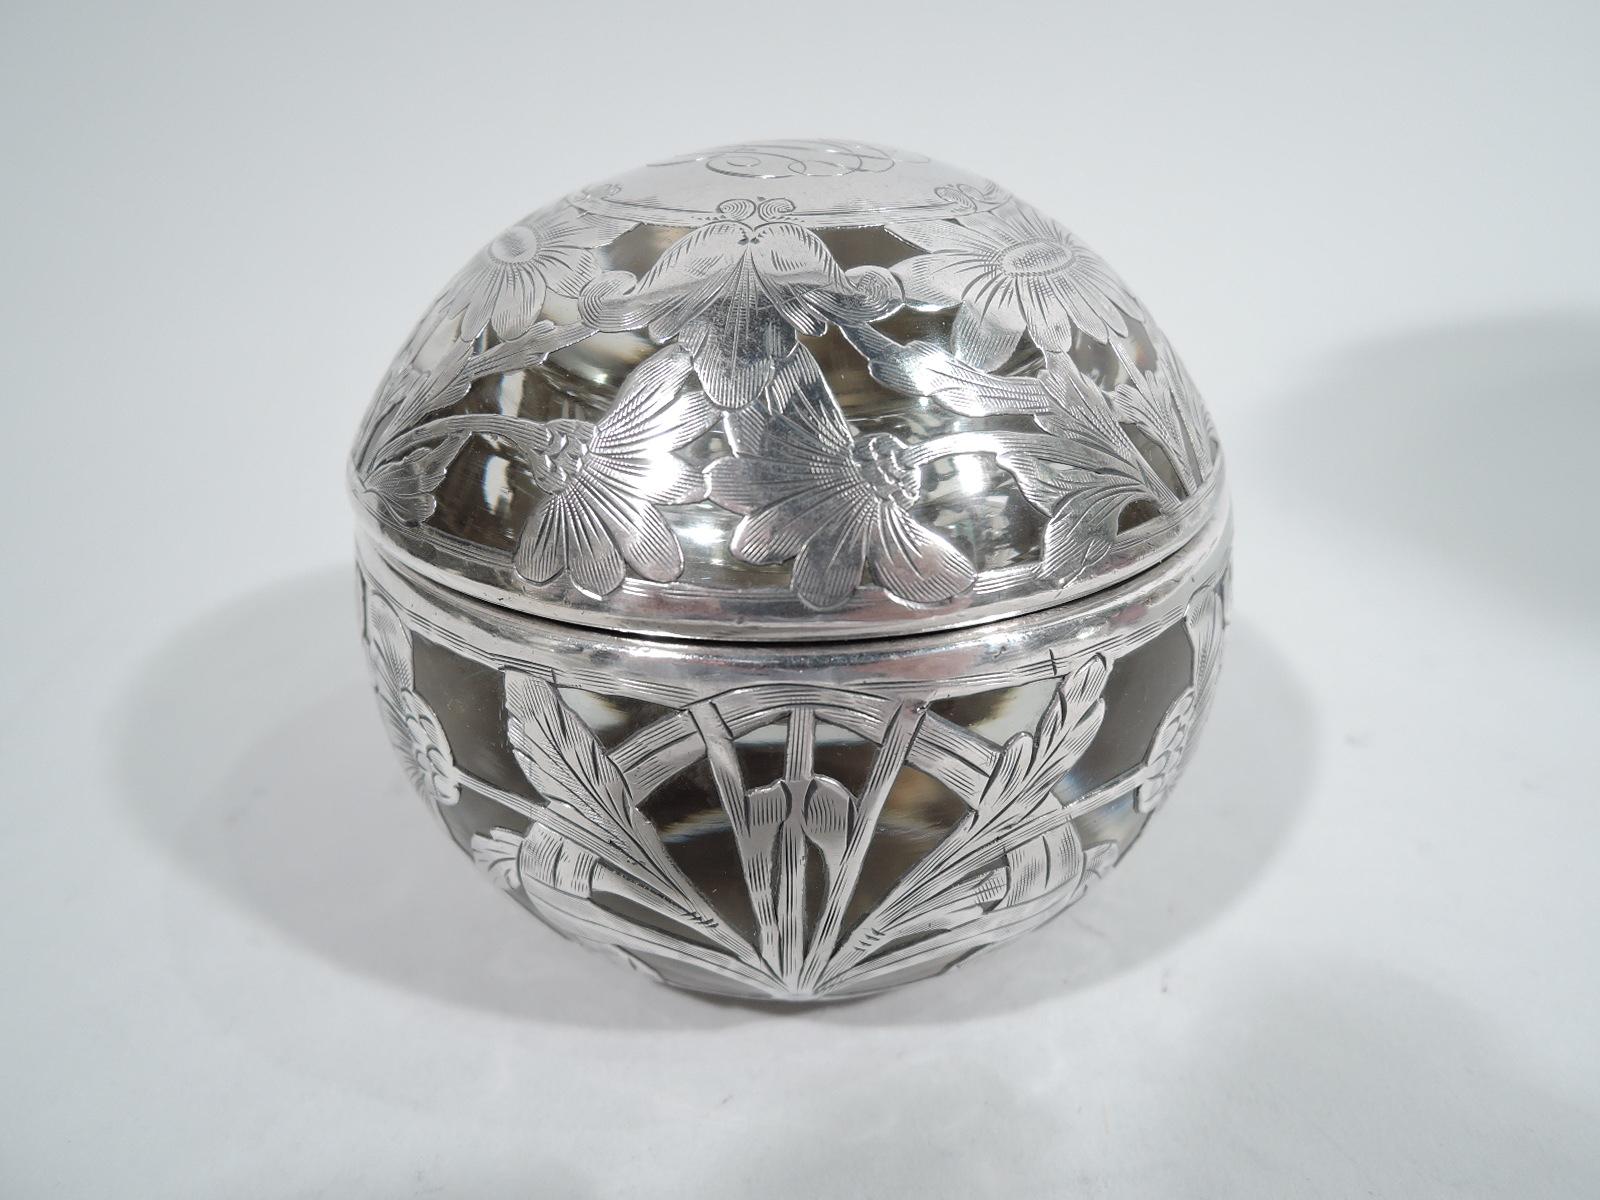 Turn-of-the-century Art Nouveau glass inkwell with engraved silver overlay. Retailed by Shreve, Crump & Low in Boston. Globular. Body has flat top and short inset neck. Cover interior has corresponding well. Flower overlay with tendrils forming